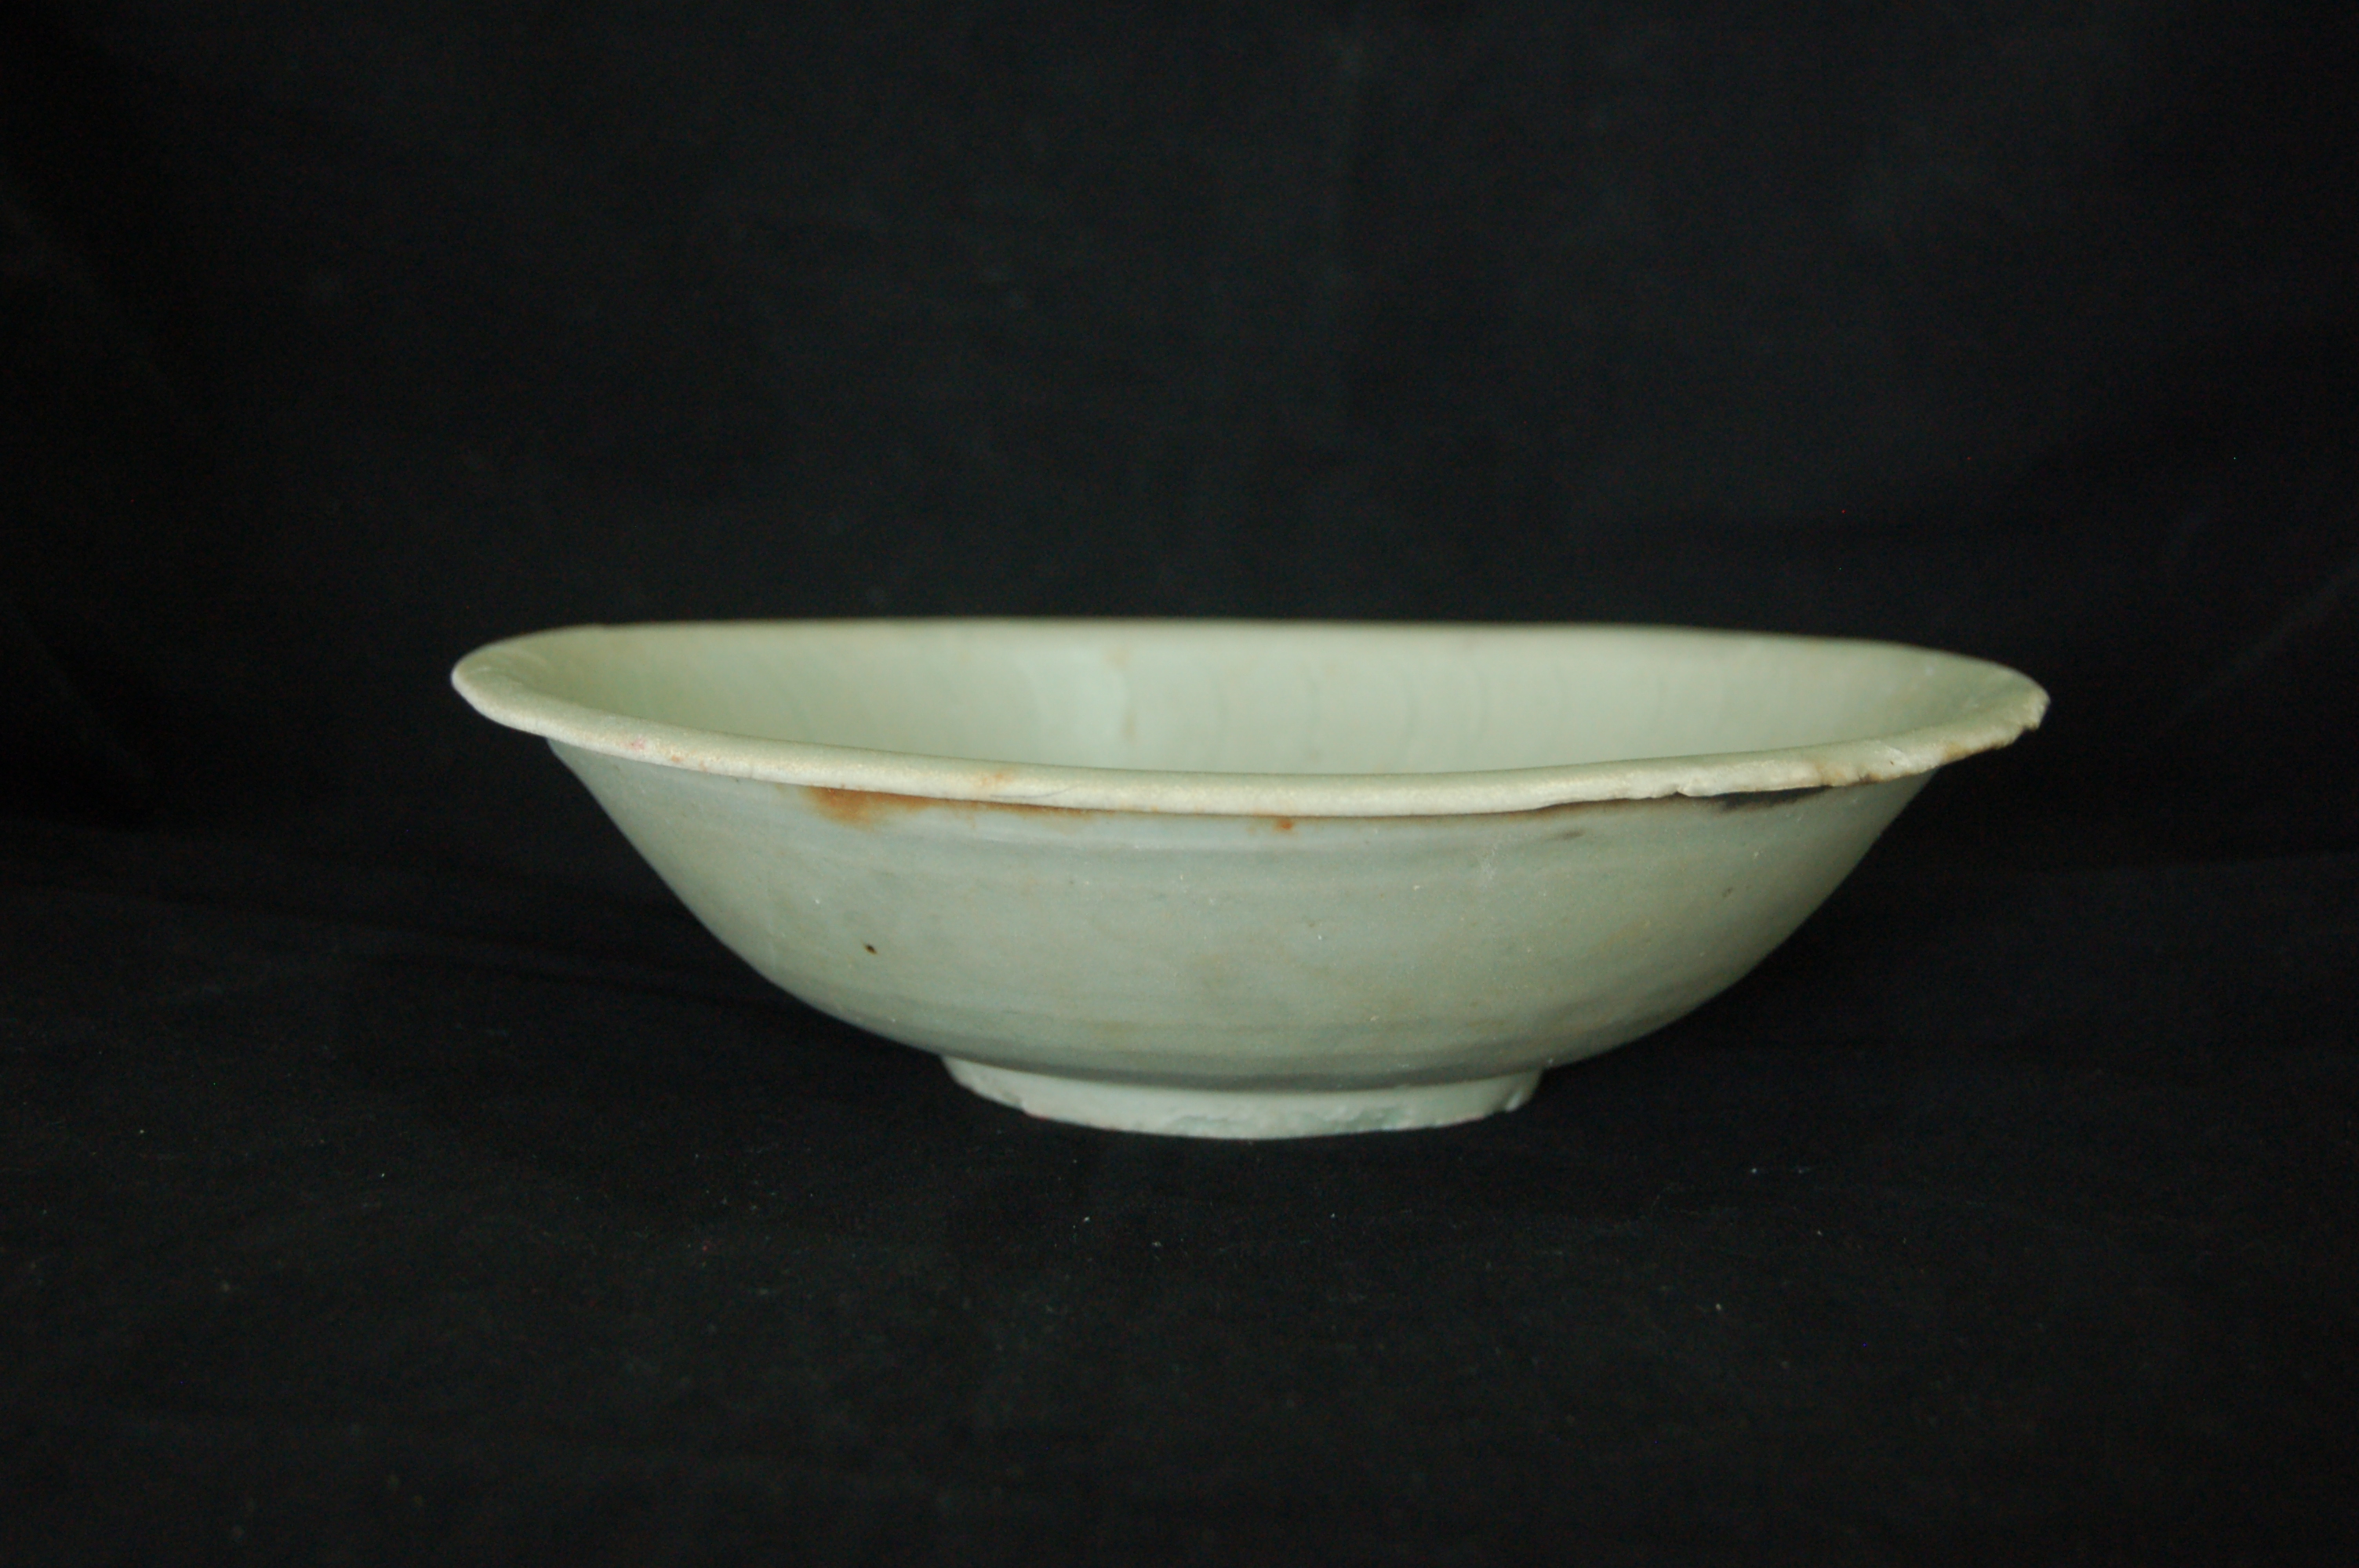 Green-glazed shallow bowl with an everted rim, rounded walls and a carved foot-ring. The well is decorated with incised waves and a central cloud while the cavetto displays paired striations. Diameter 22 cm, height 6 cm.